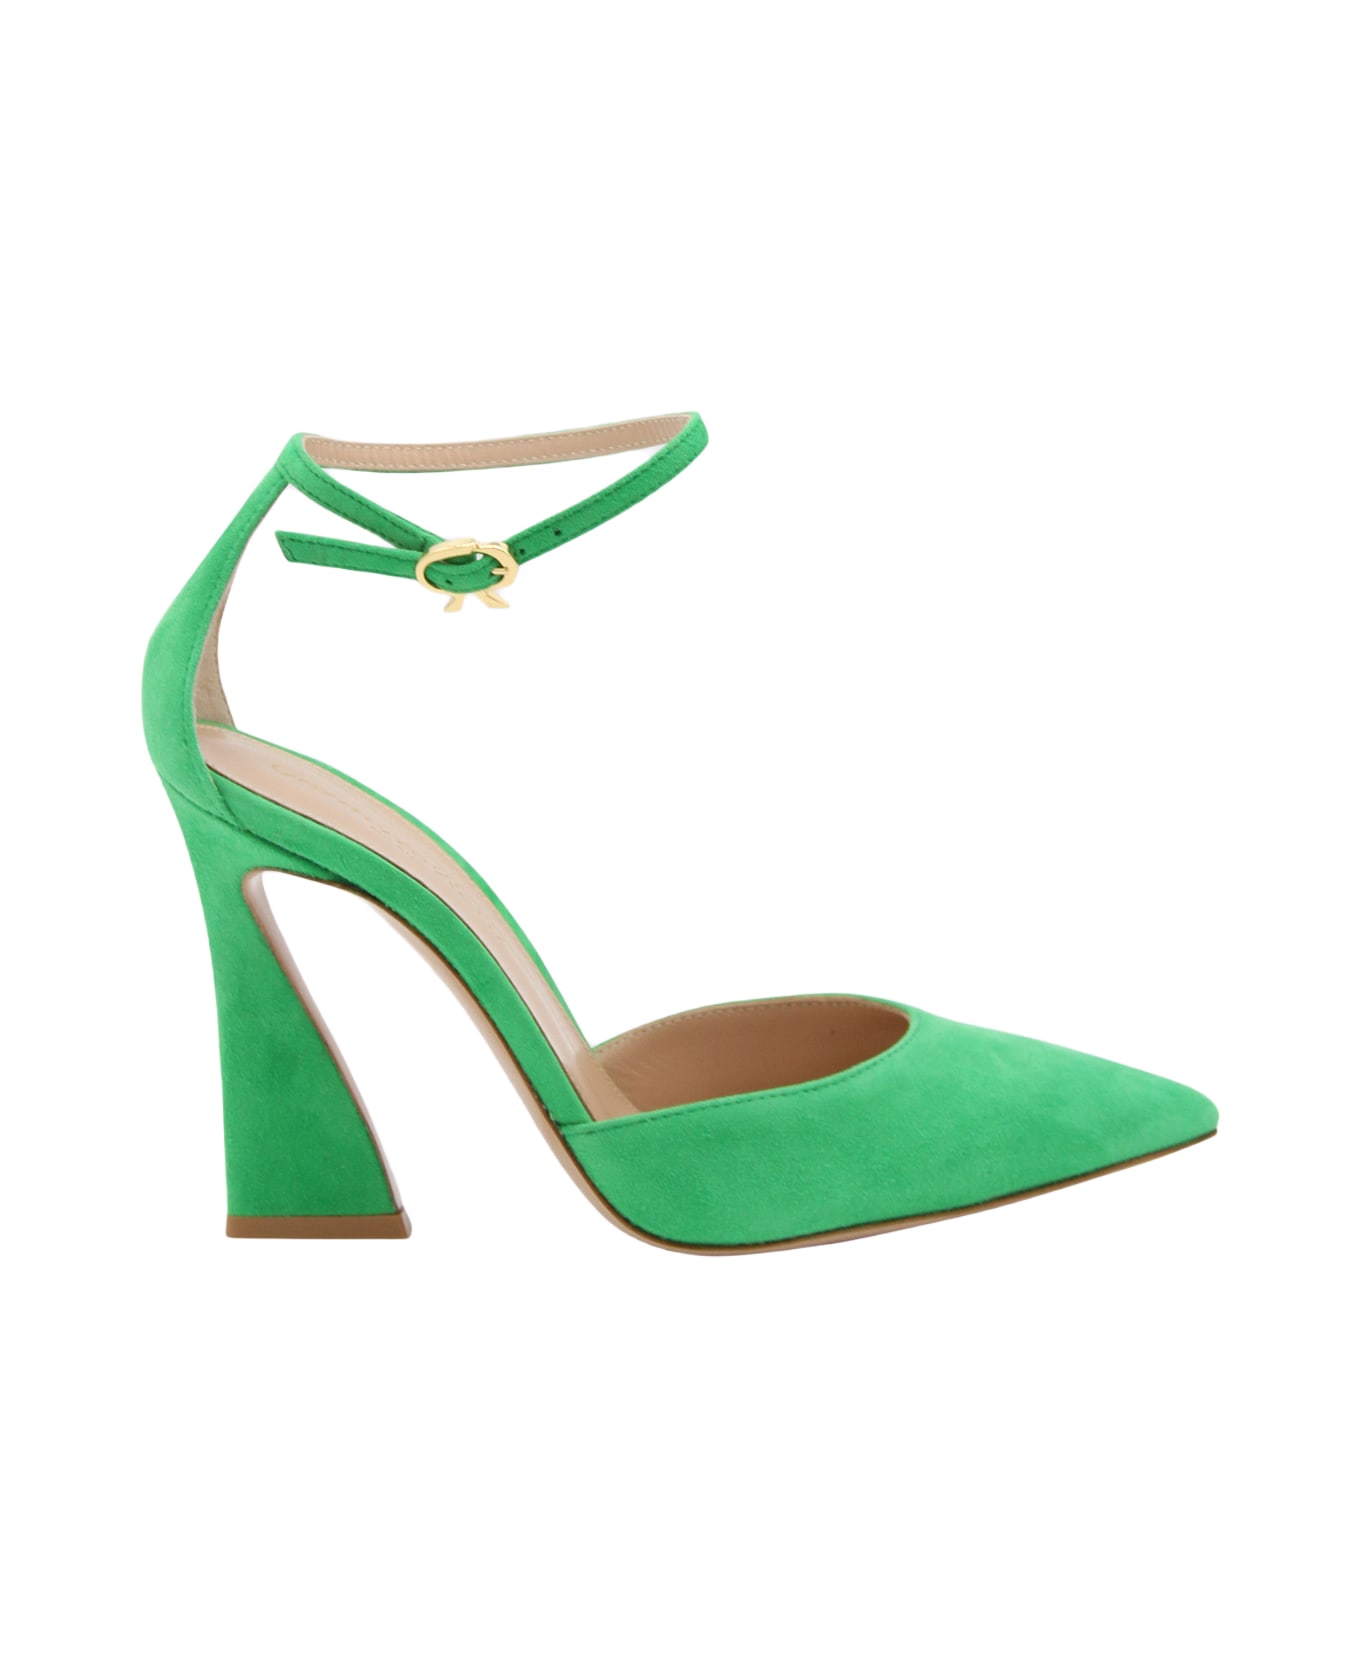 Gianvito Rossi Green Suede Holly Pumps - Green